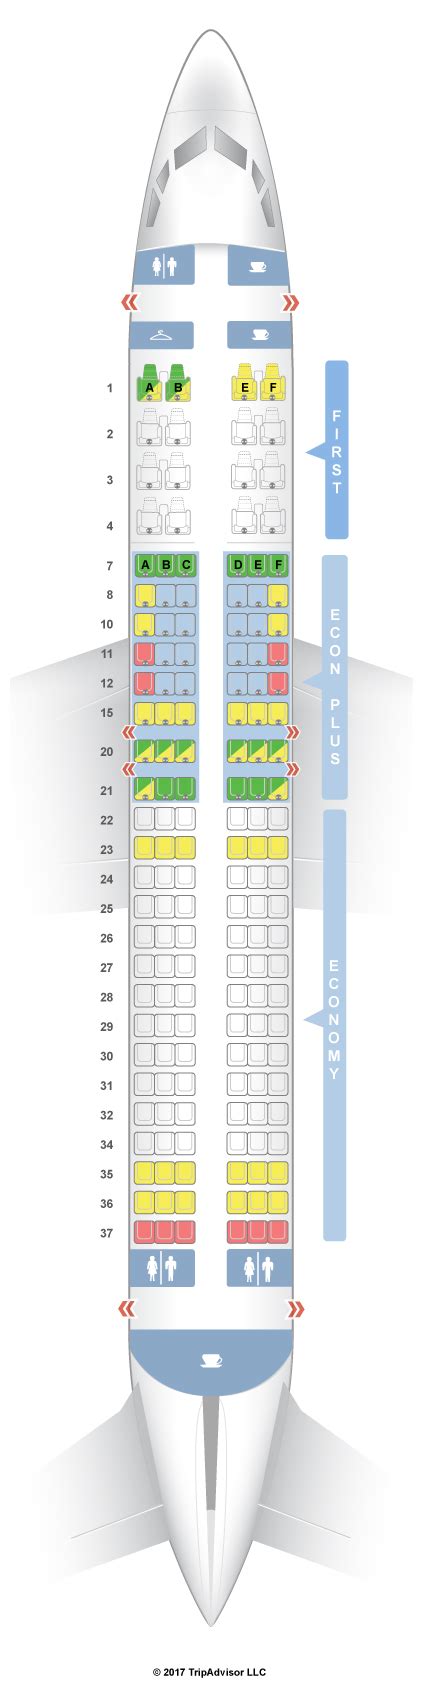 boeing 737-800 united seating chart